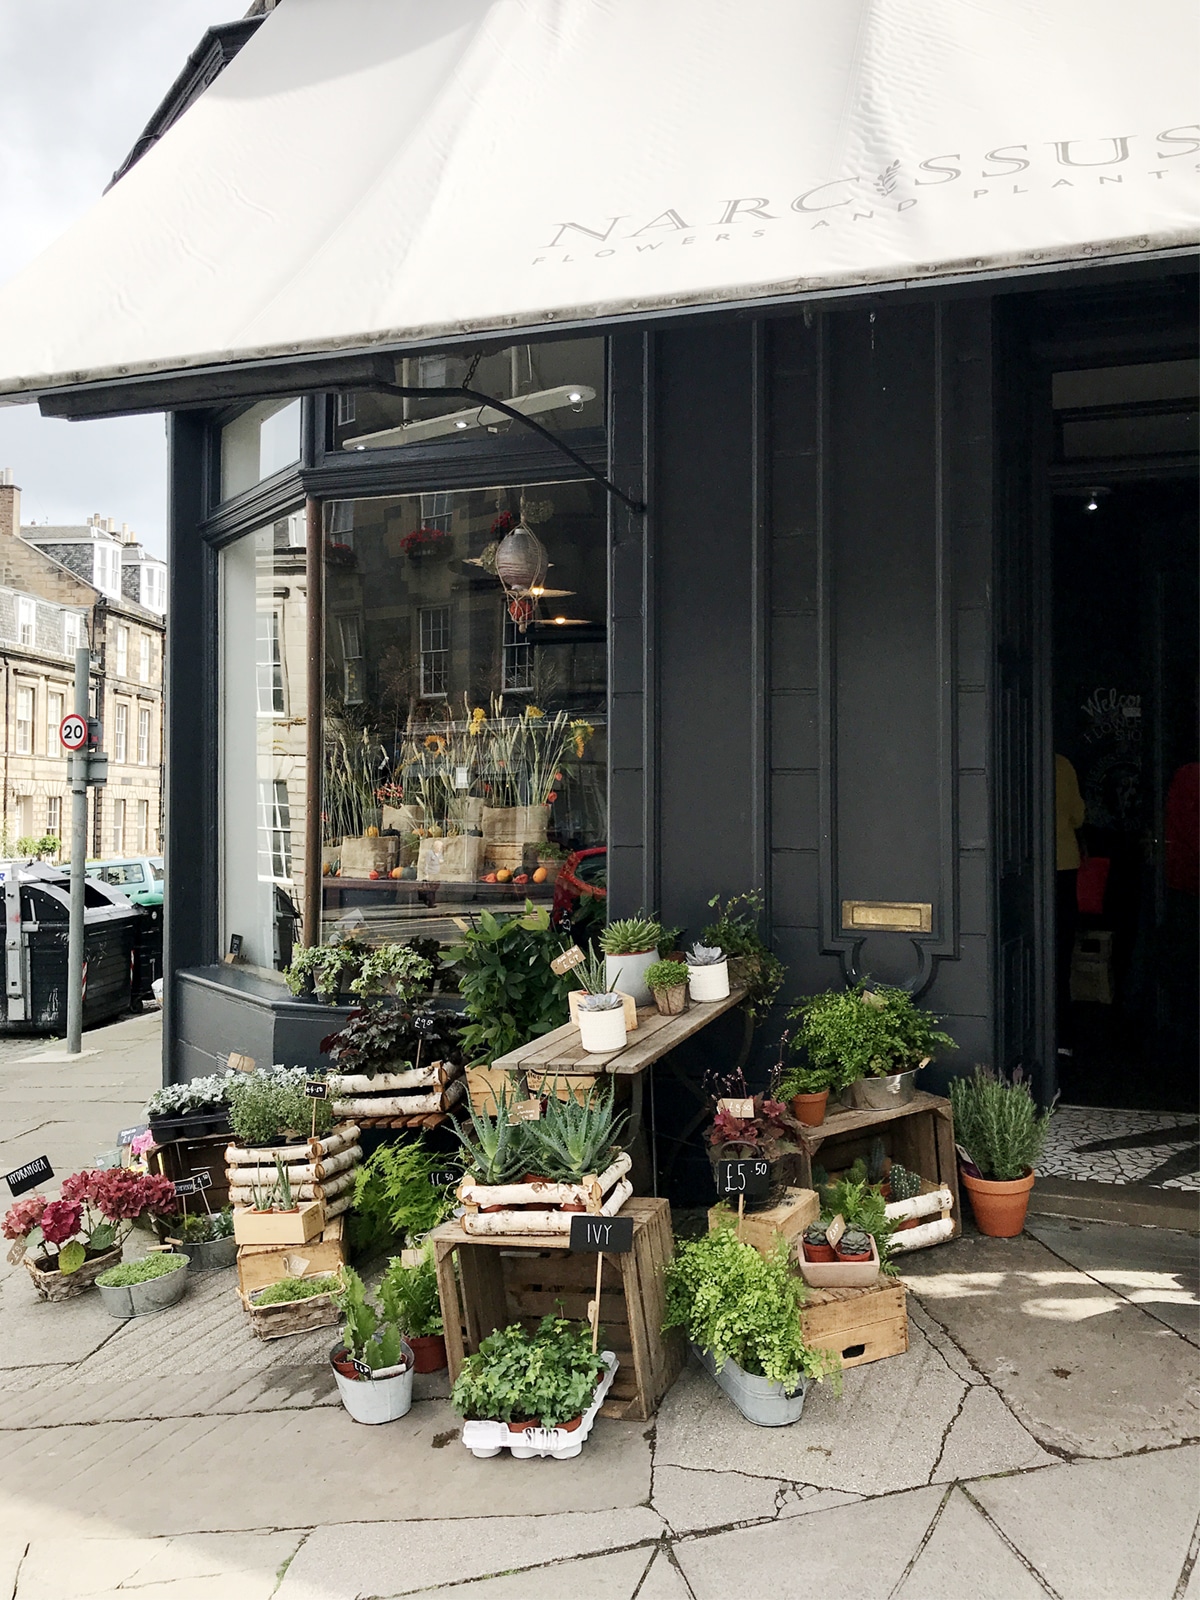 narcissus flower shop in edinburgh | city guide on coco kelley